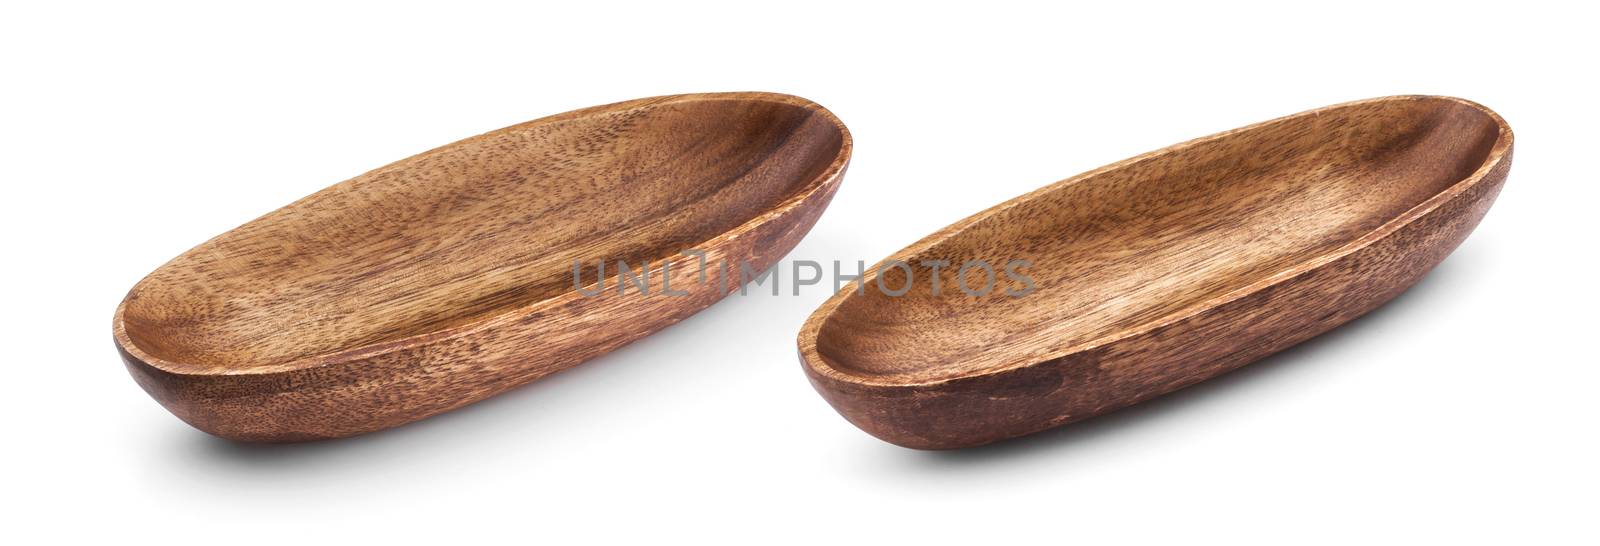 Empty long wooden bowl isolated on white background